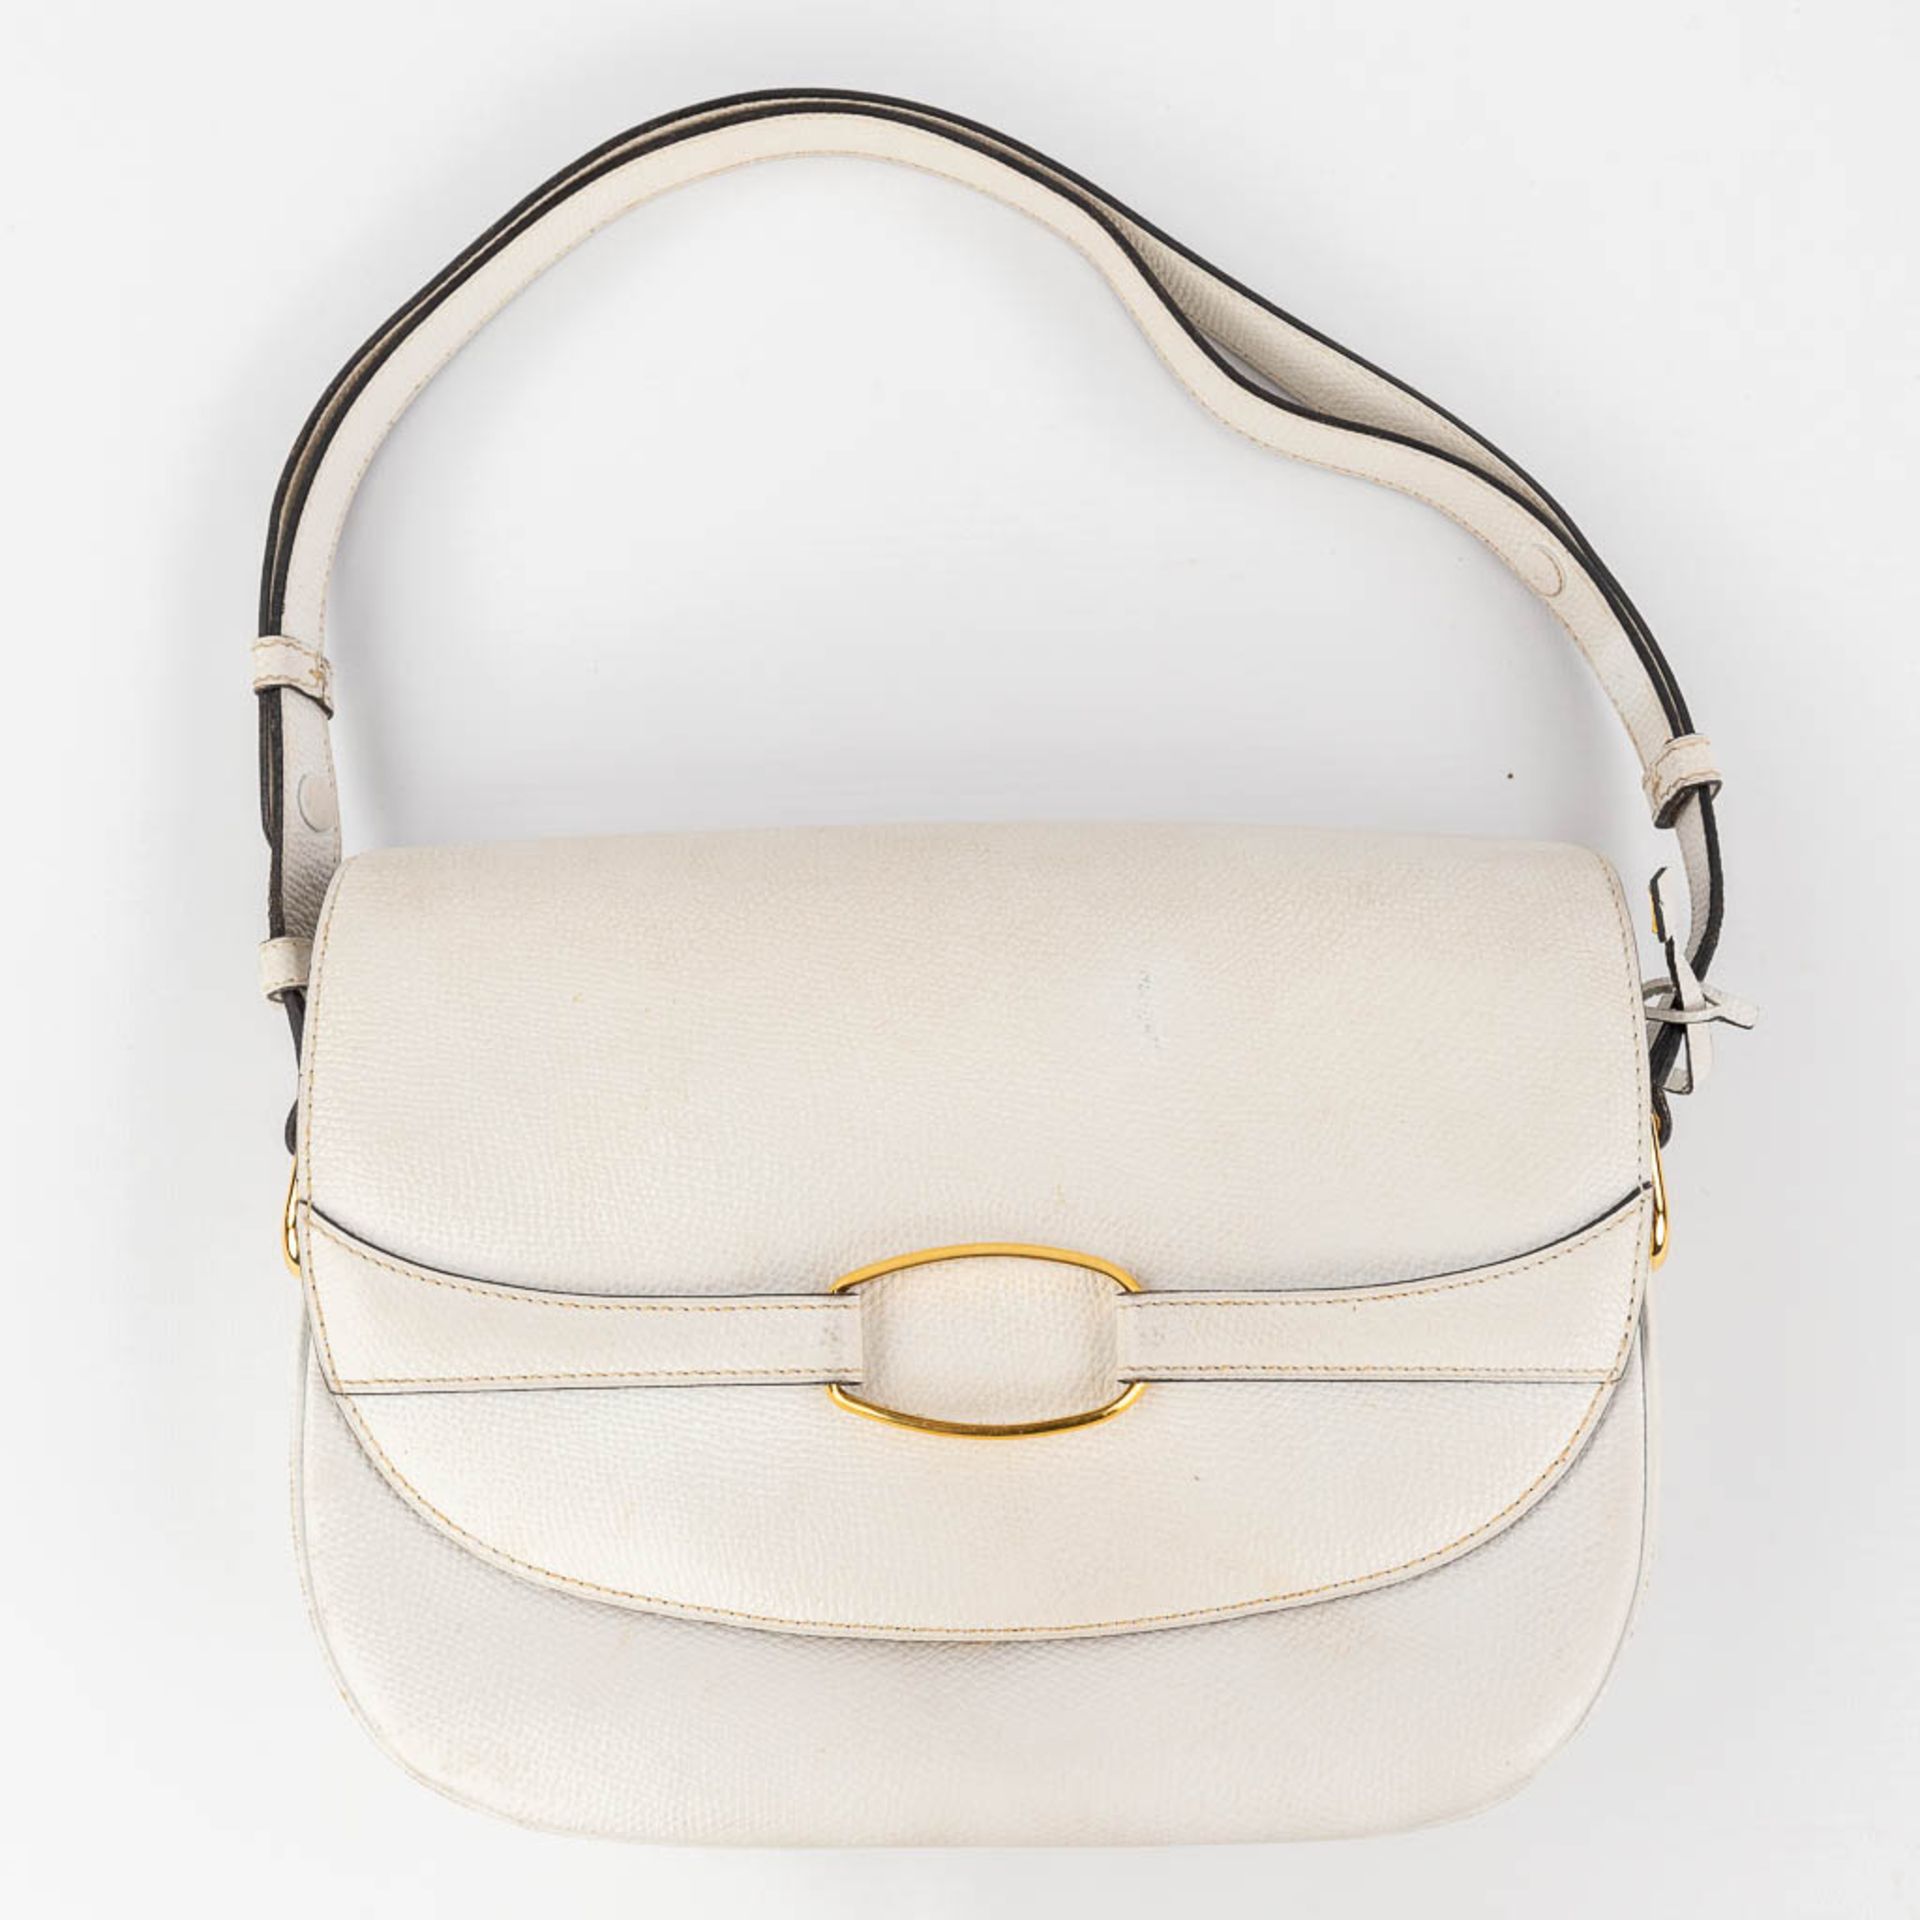 Delvaux, a handbag made of white leather with gold-plated elements. (W: 26 x H: 19 cm) - Bild 11 aus 19